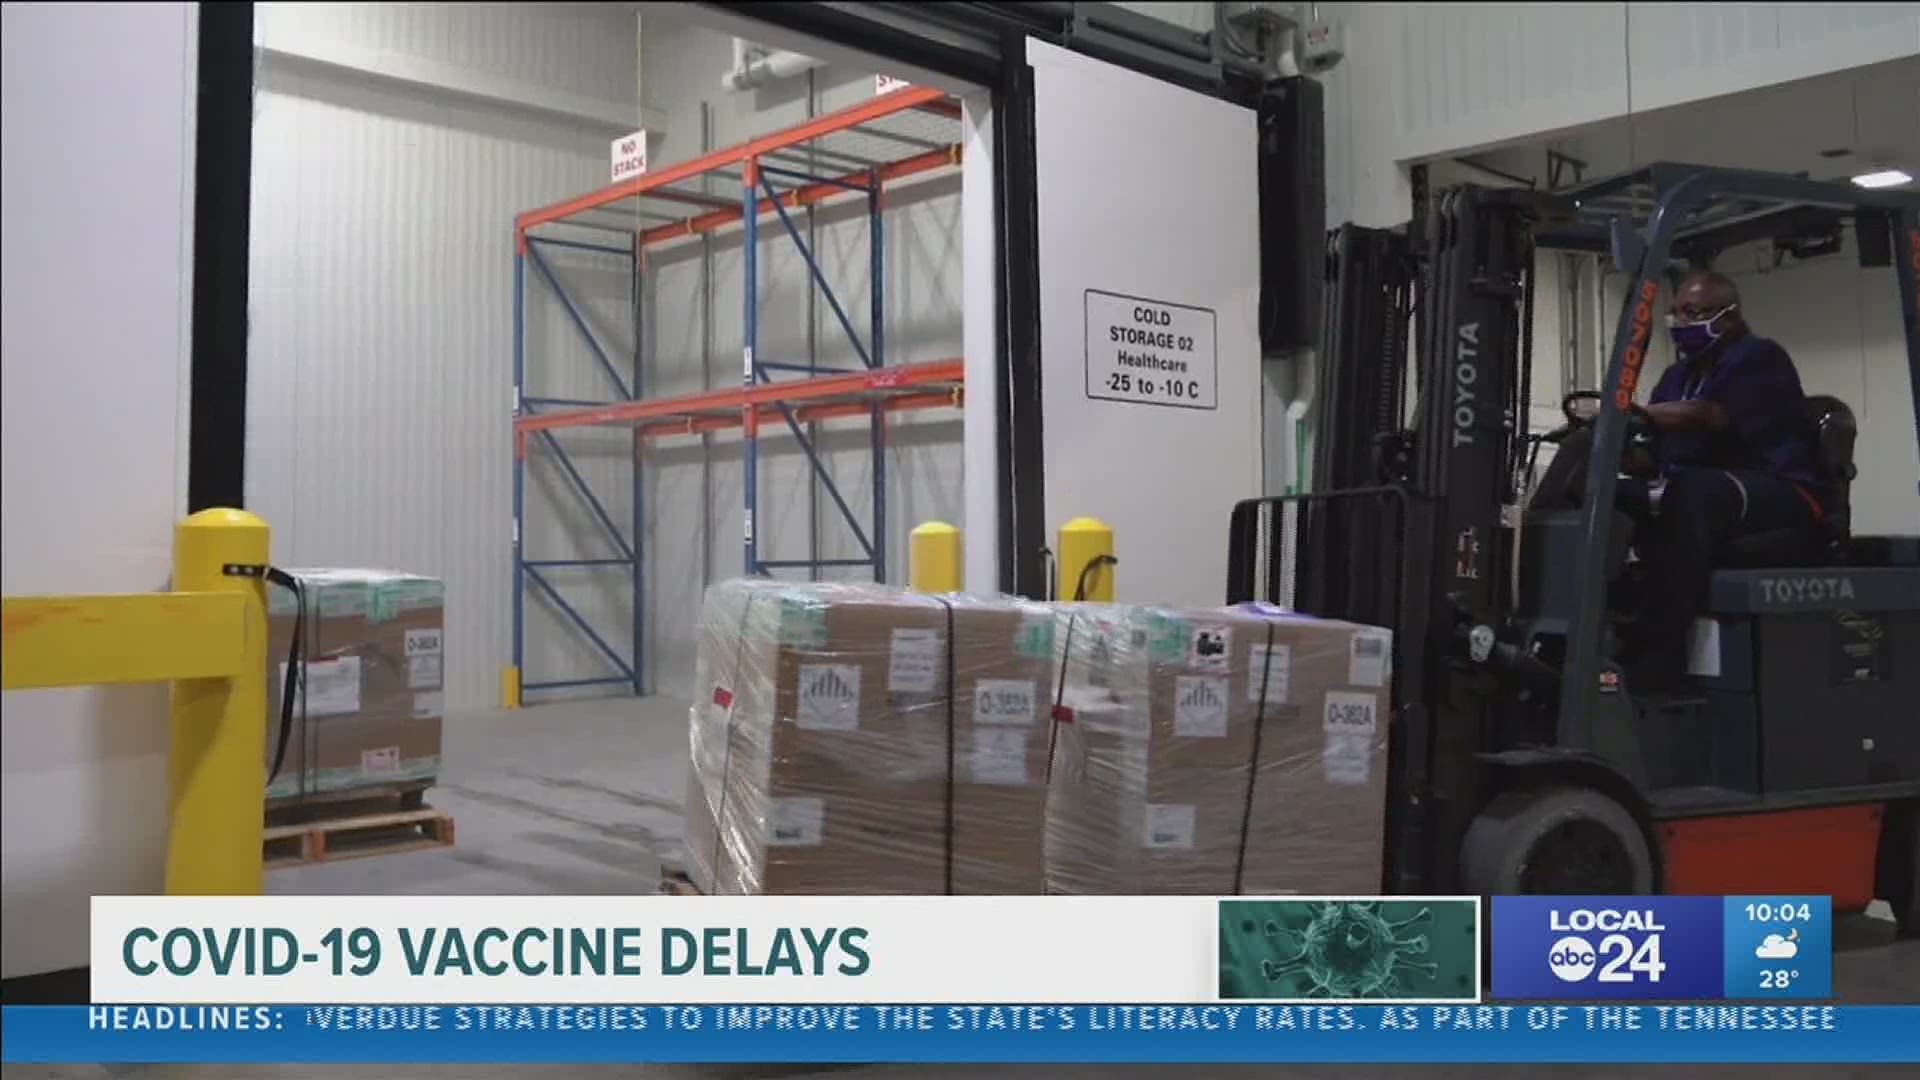 A University of Memphis professor breaks down the challenges in the vaccine rollout.